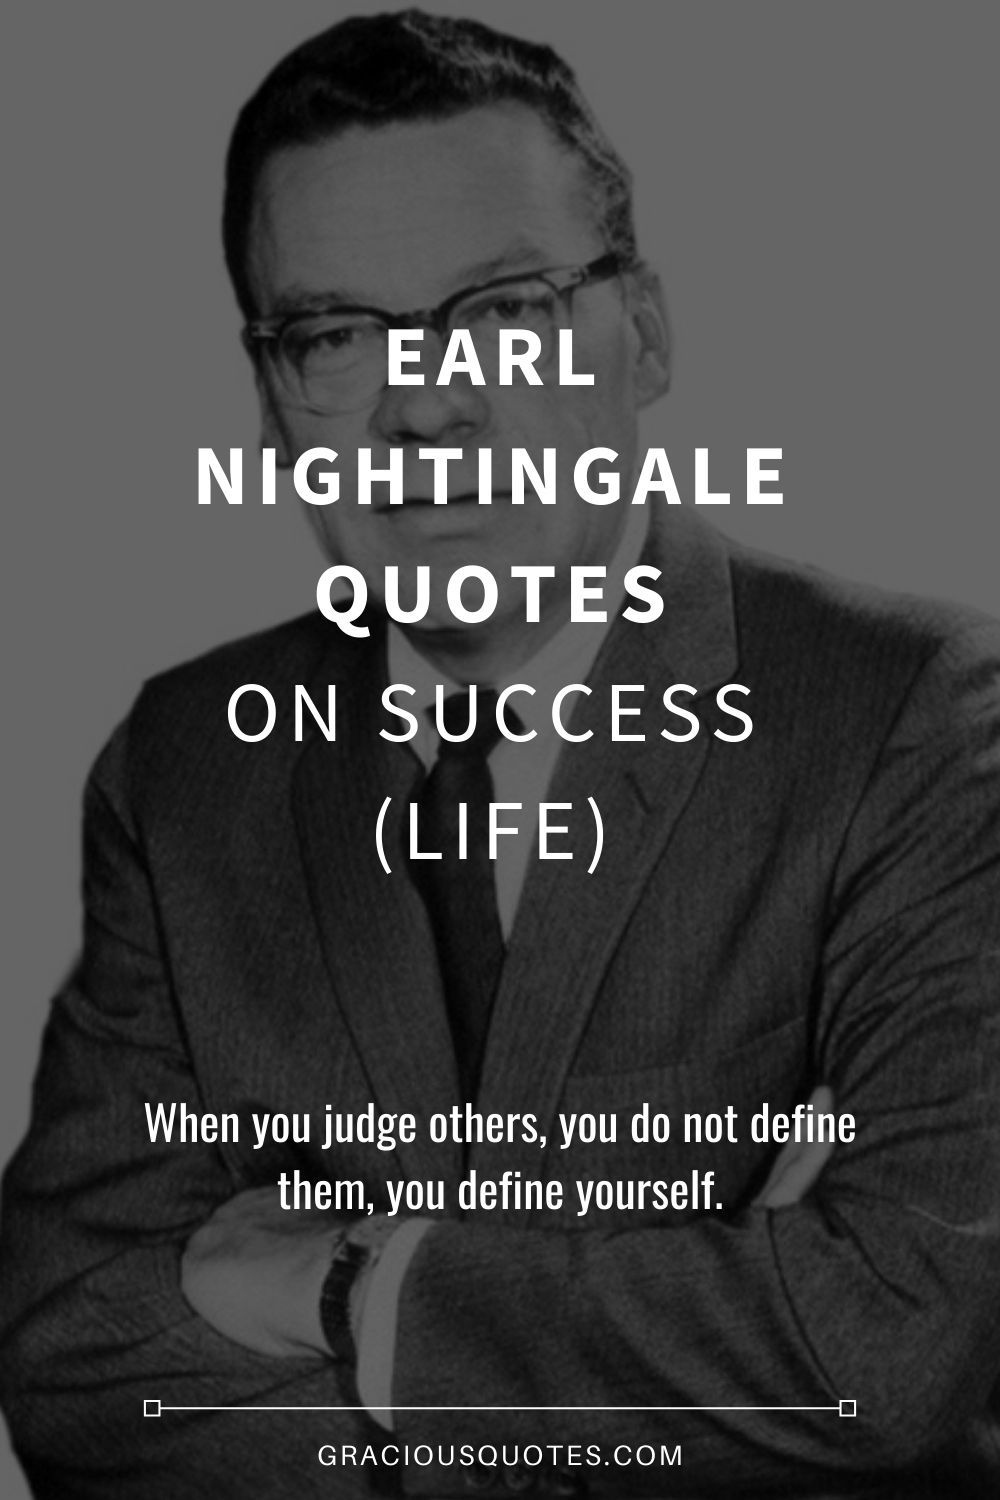 Earl Nightingale Quotes on Success (LIFE) - Gracious Quotes